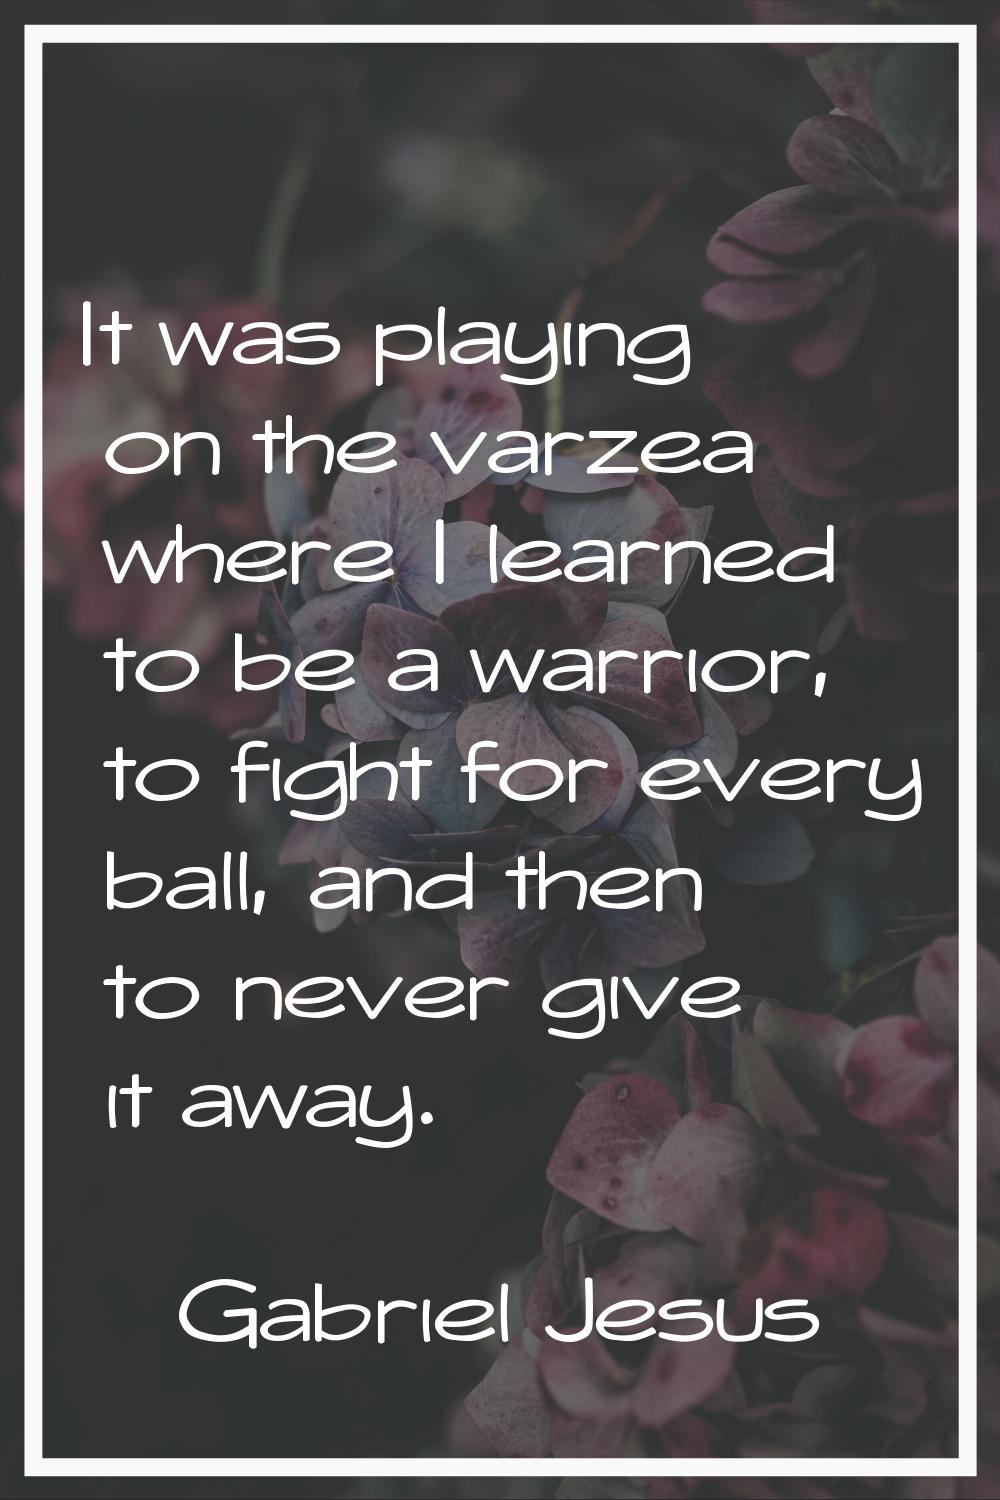 It was playing on the varzea where I learned to be a warrior, to fight for every ball, and then to 